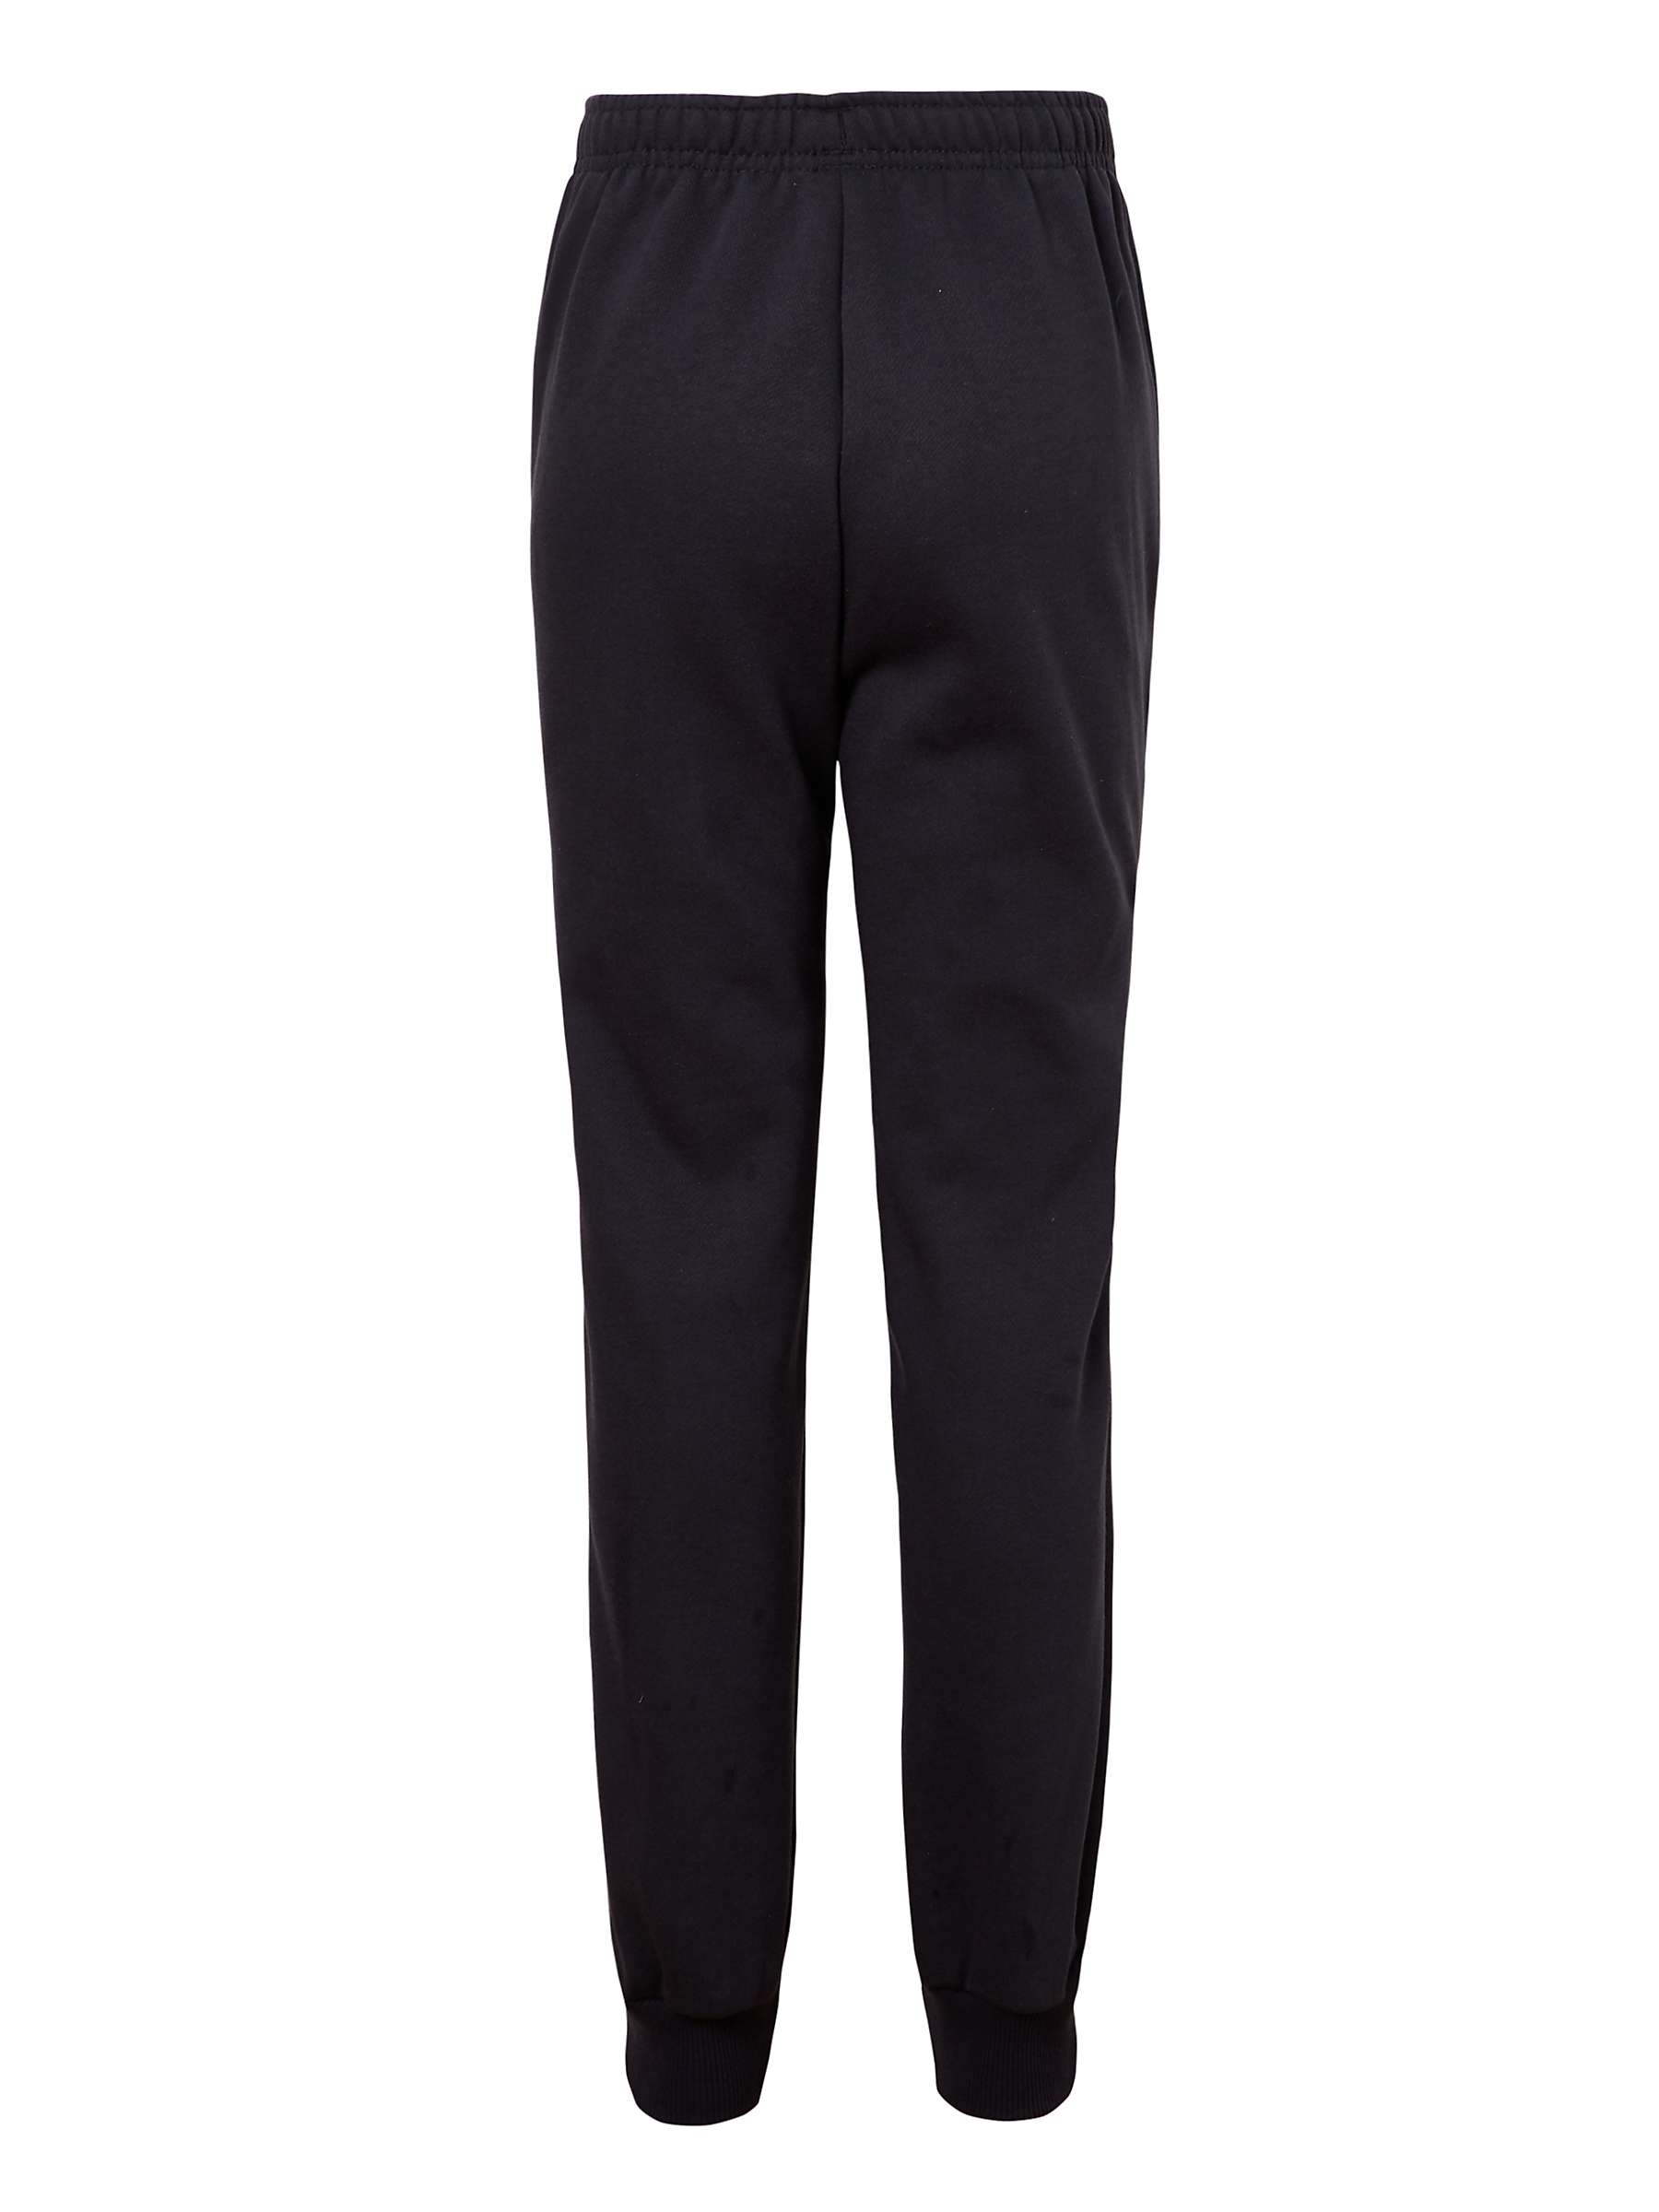 Buy Chigwell School Tracksuit Bottoms, Navy Blue Online at johnlewis.com